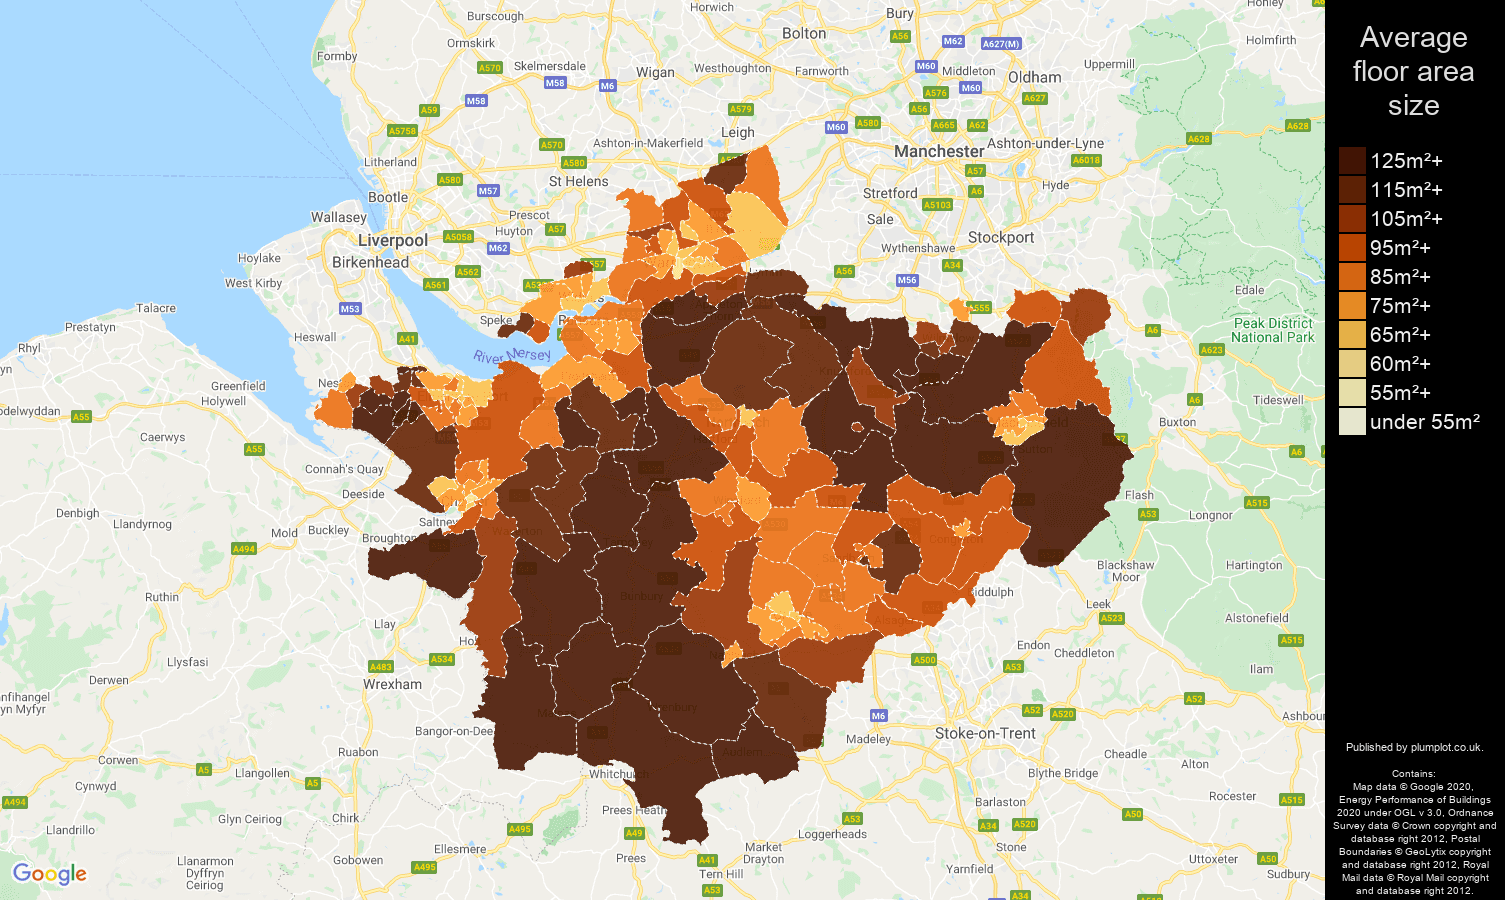 Cheshire map of average floor area size of properties